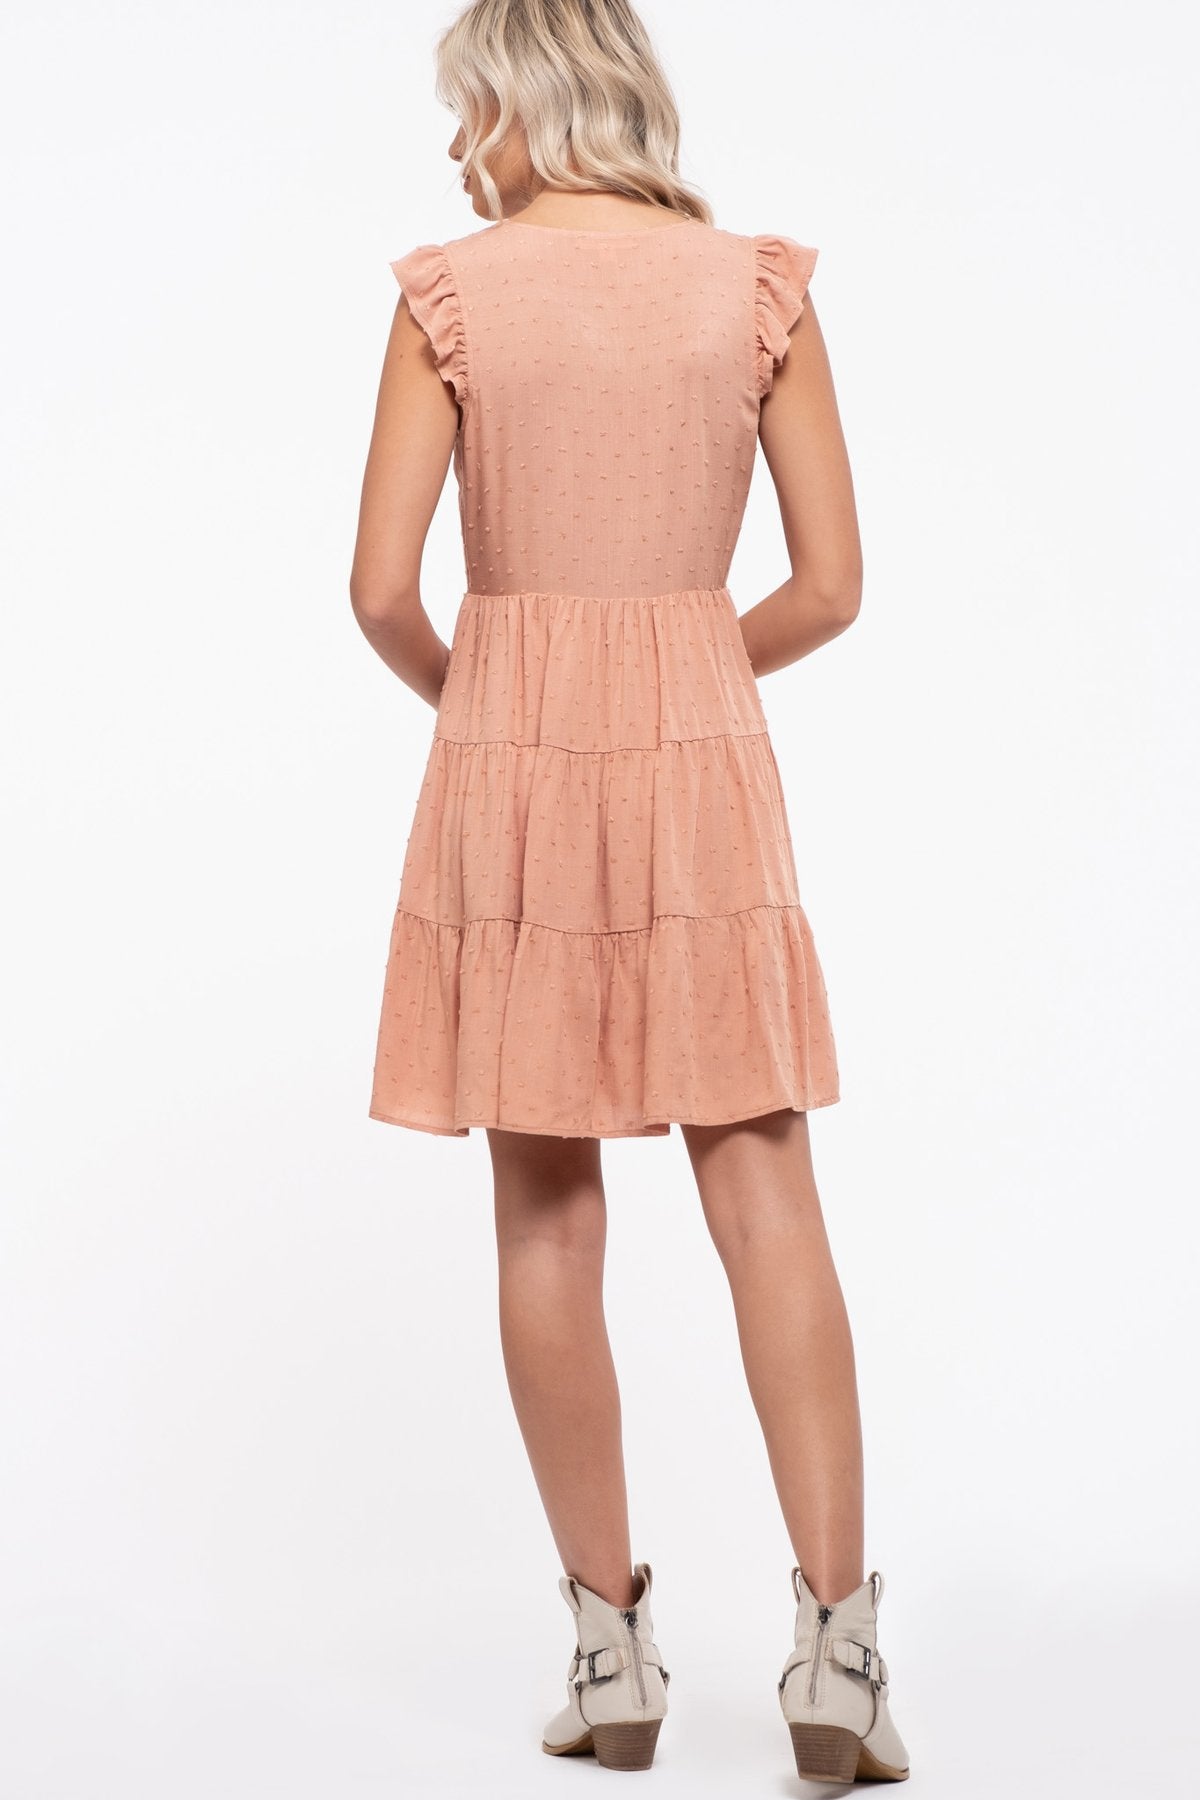 Share Your Love Dress In Dusty Peach